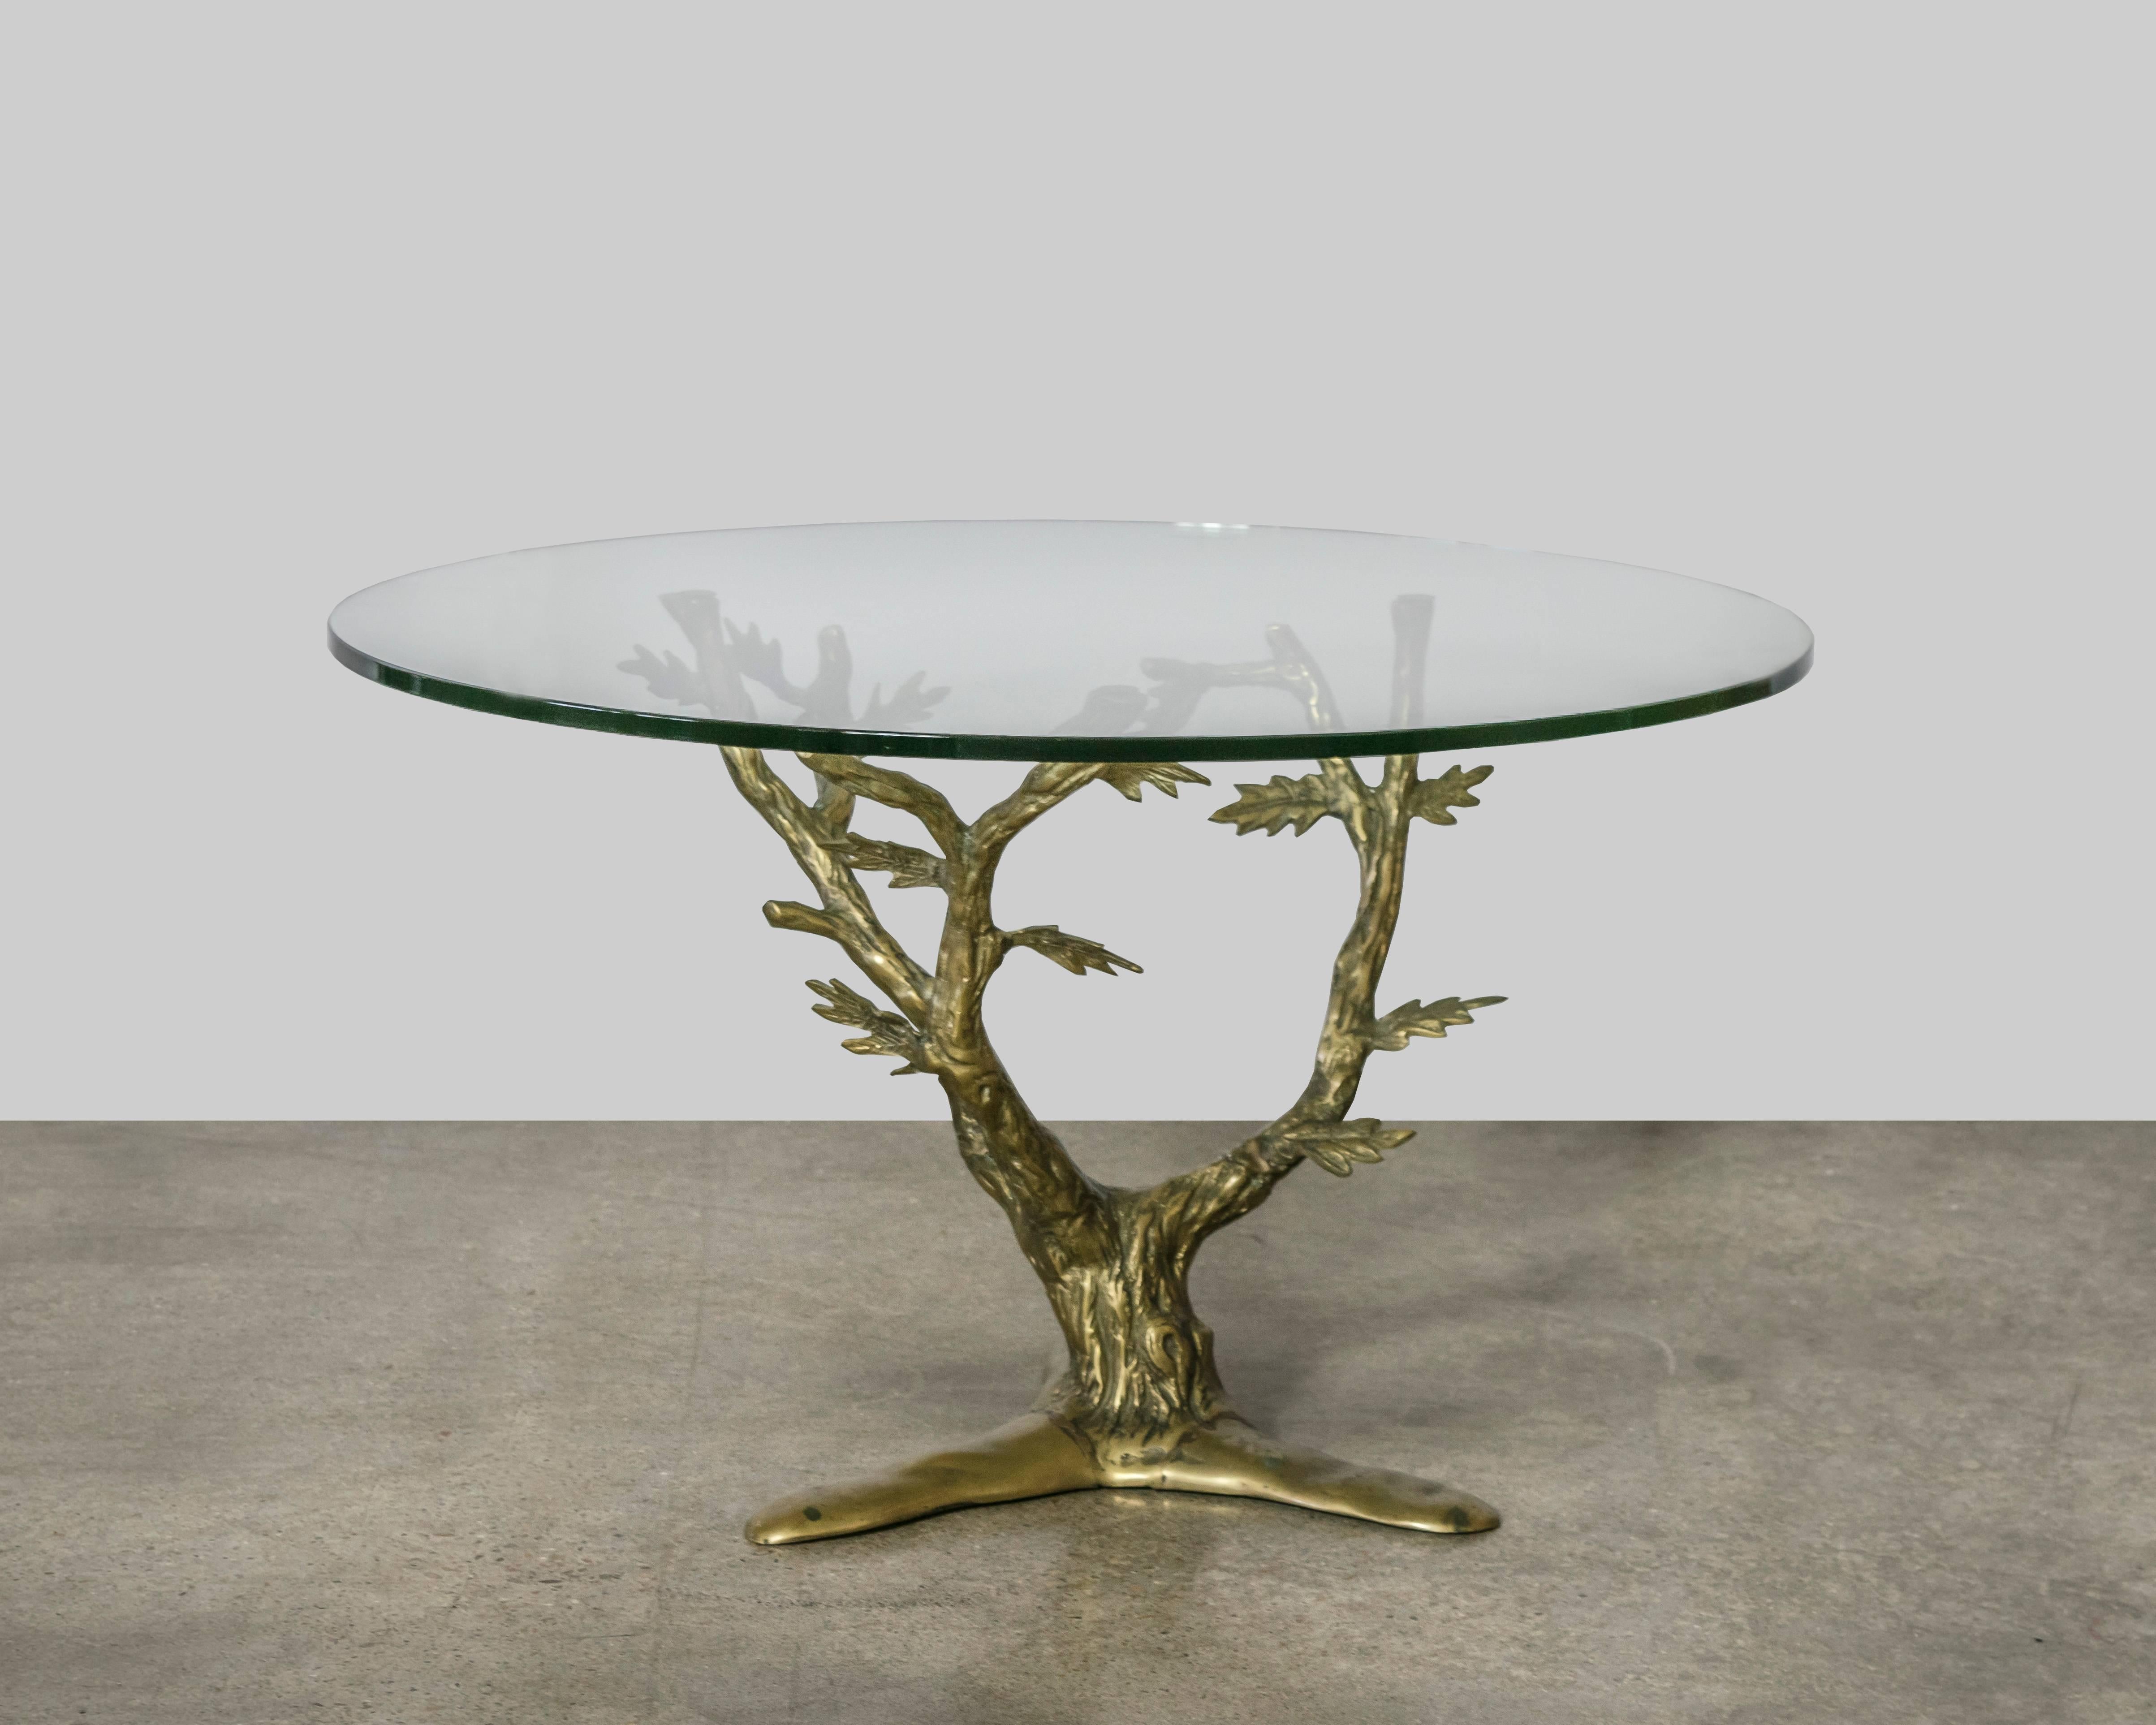 Exquisitely detailed brass tree table with three branch arms and three legs designed and manufactured by Willy Daro. This table is a showstopper.